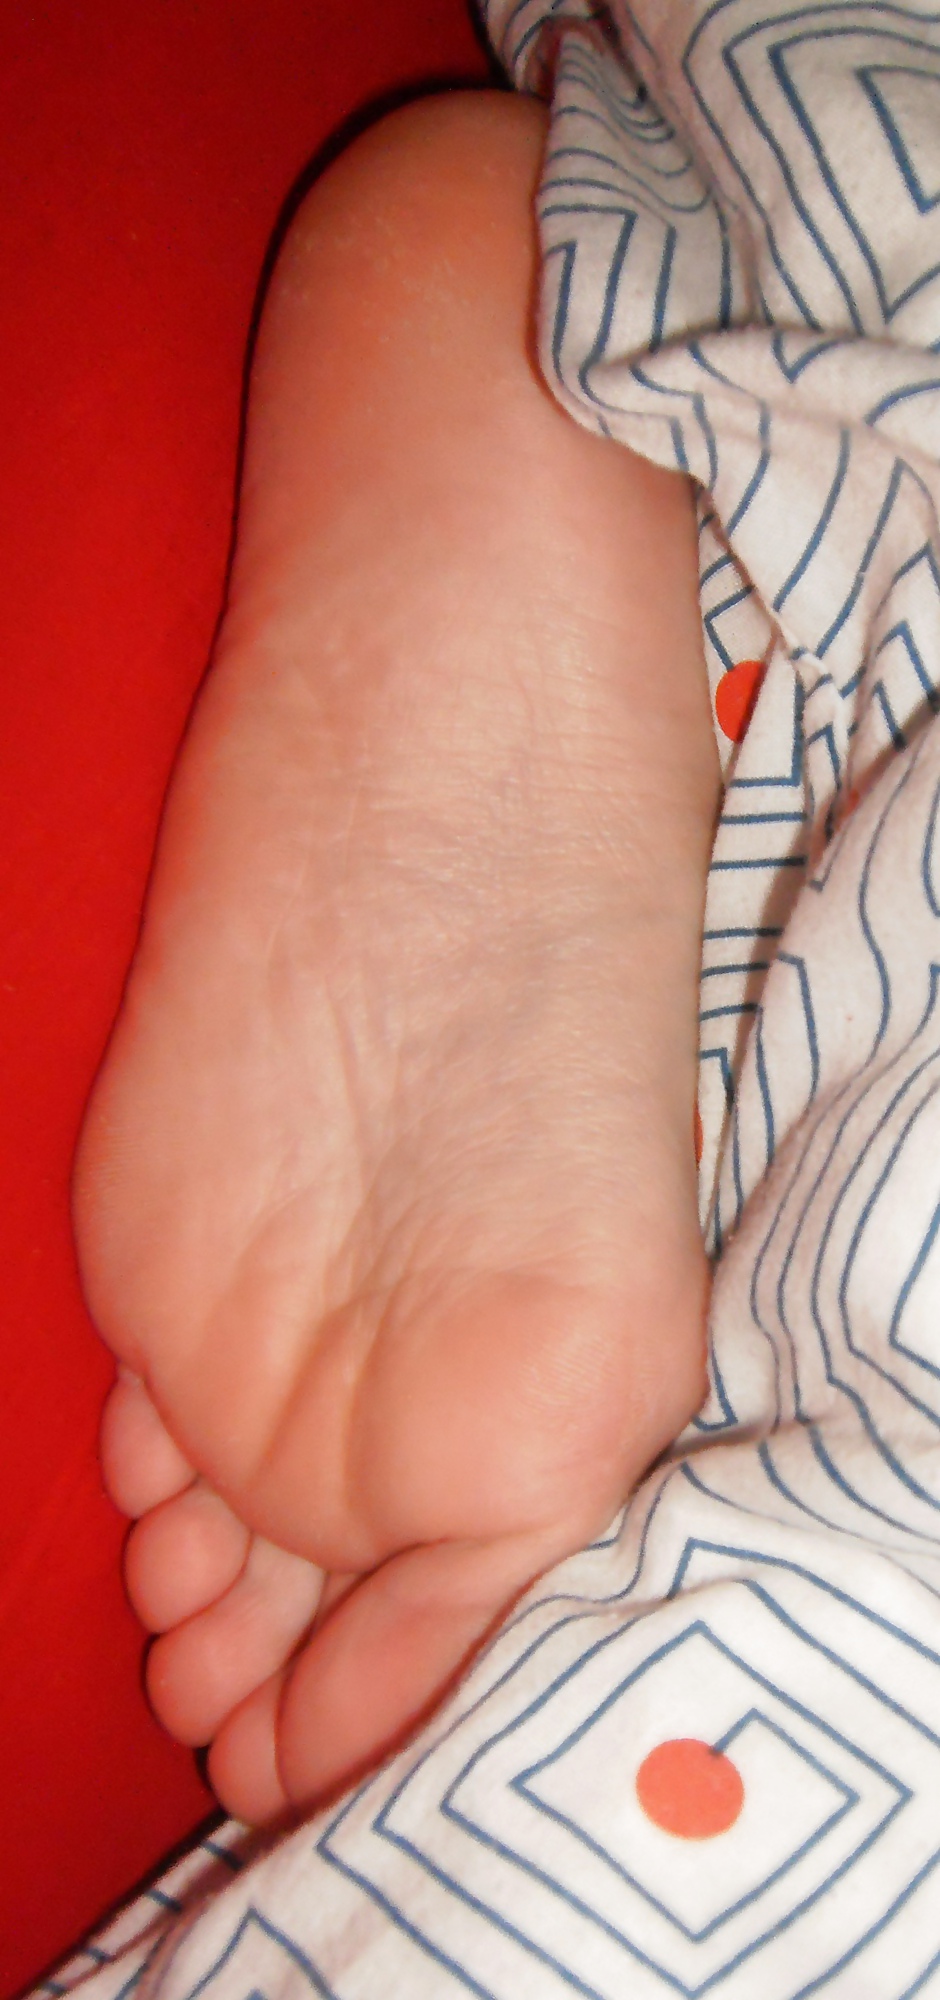 BB 's Feet 2012 - Foot Model with long toes, slender feet #16068951